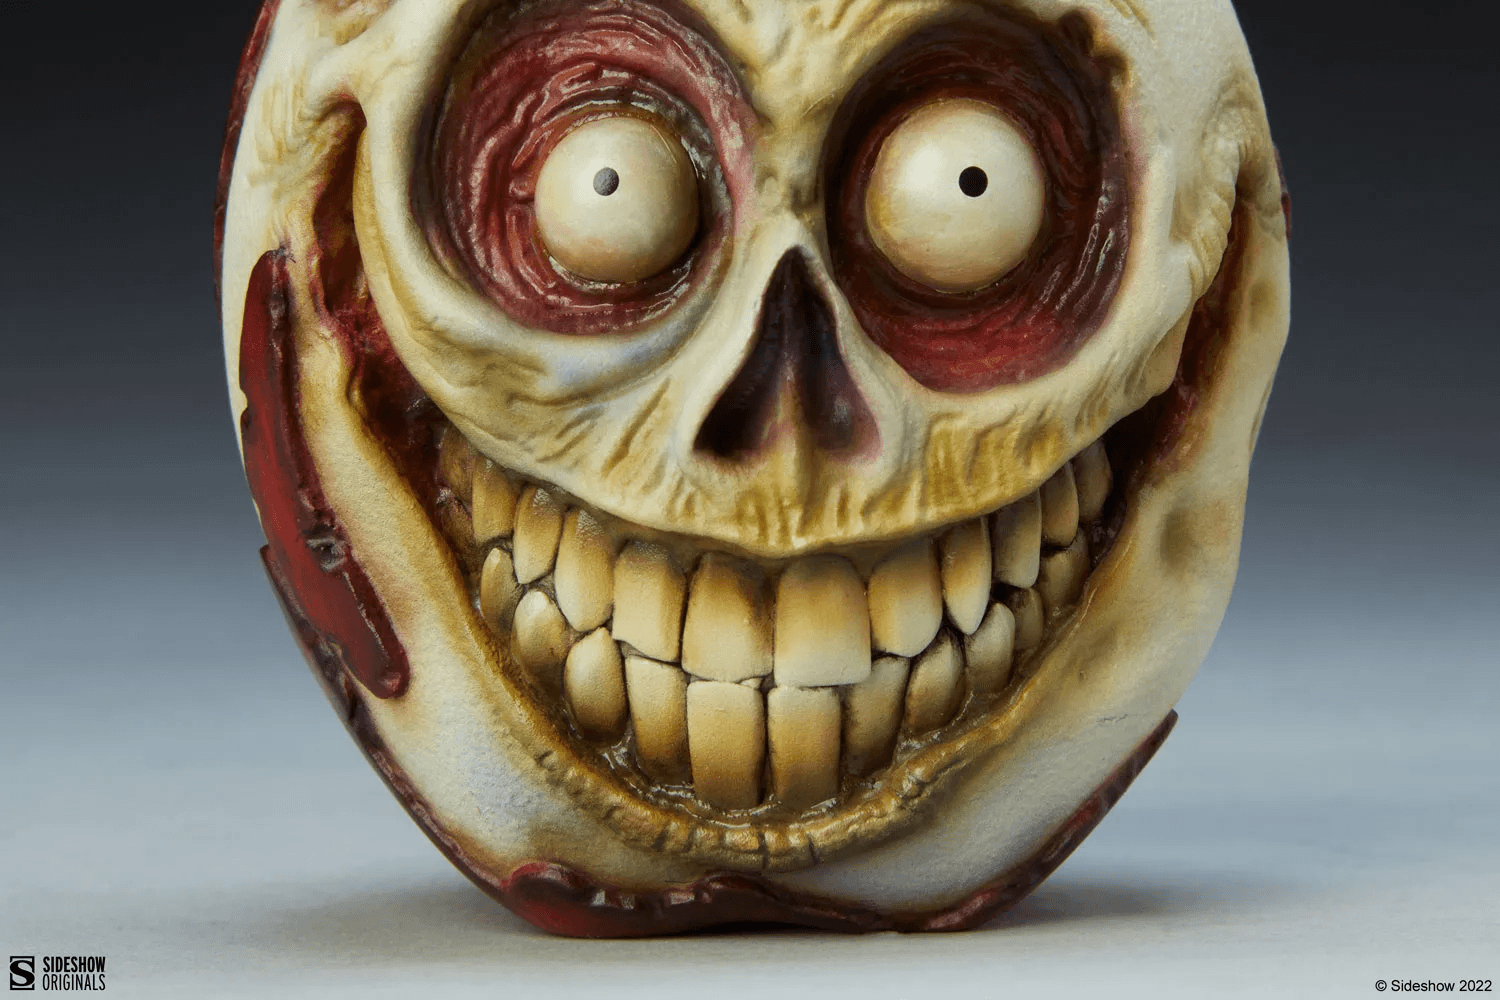 Court of the Dead - Peeled Apple Replica Action figures by Sideshow Collectibles | Titan Pop Culture